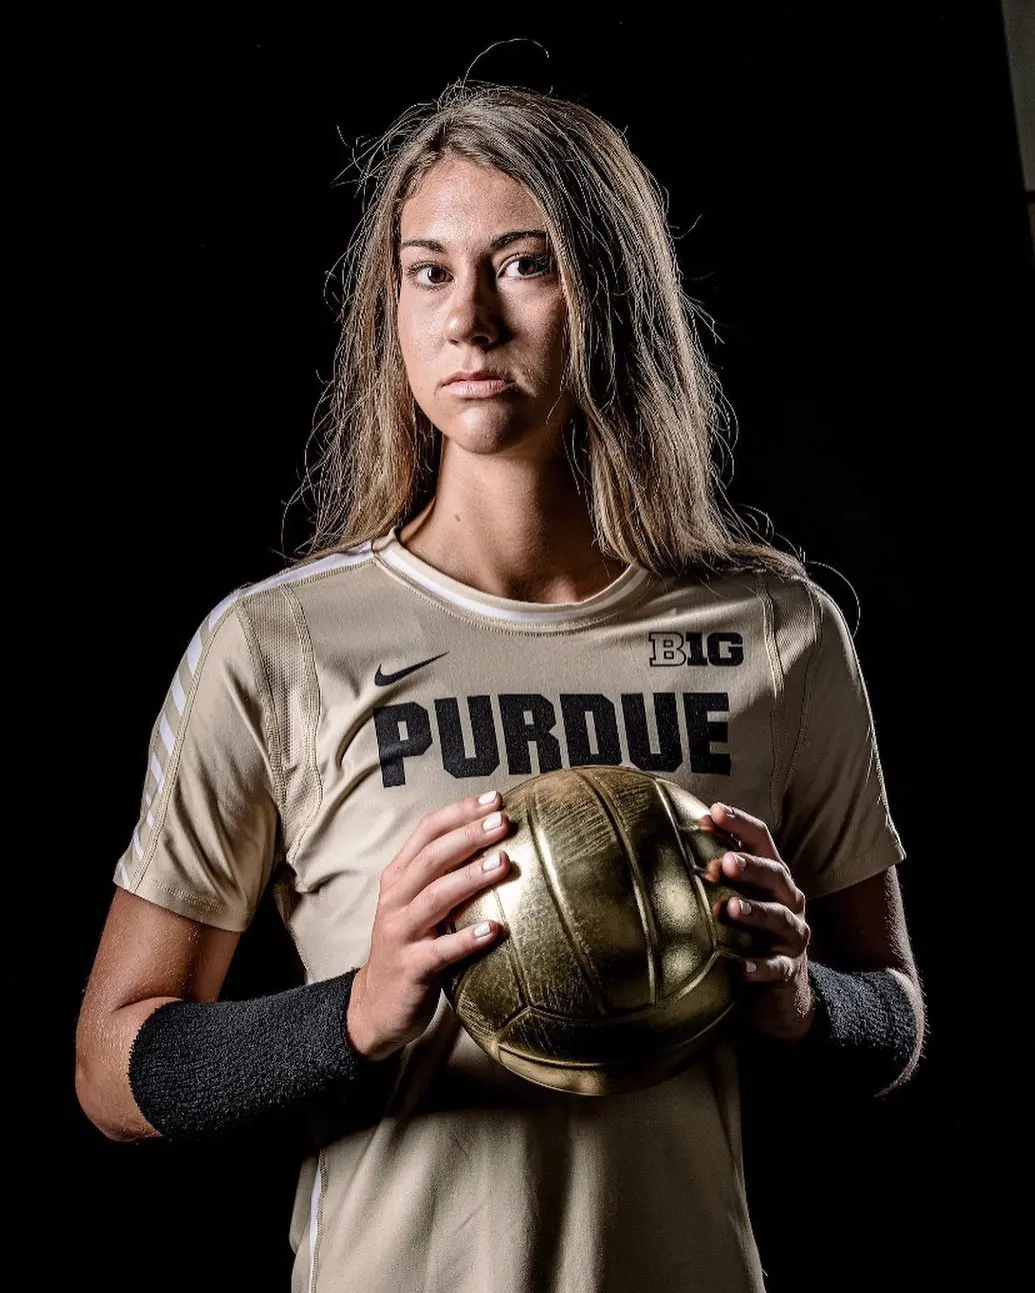 Jael played a volley ball at Purdue University.